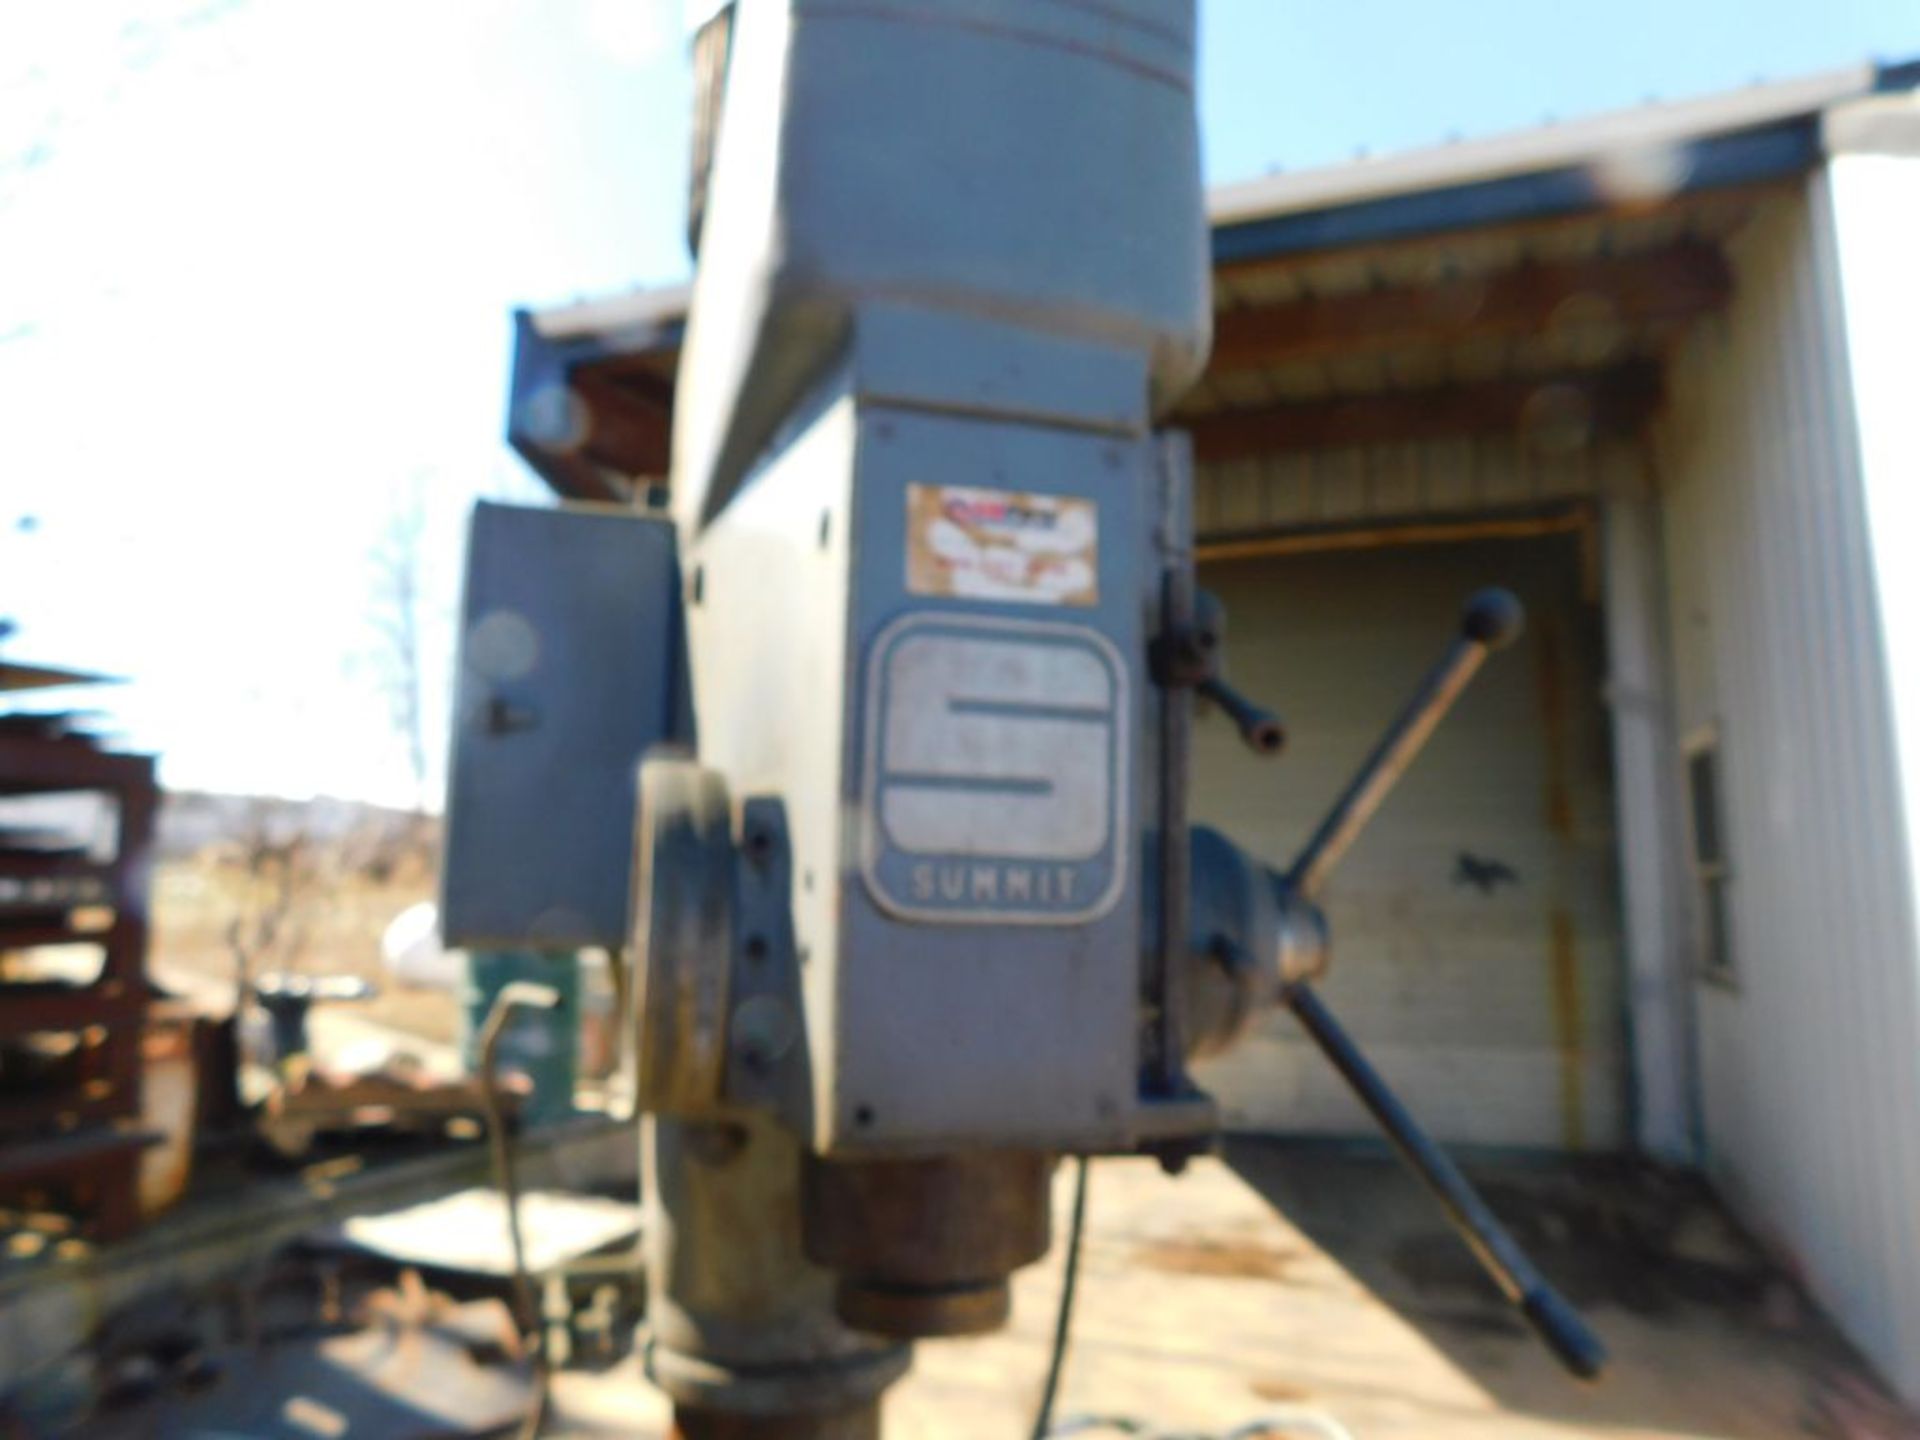 Summitt drill press, model 59R, sn 731206, 3 ph. (LOCATED AT and to be picked up at: 3341 Addison - Image 5 of 5